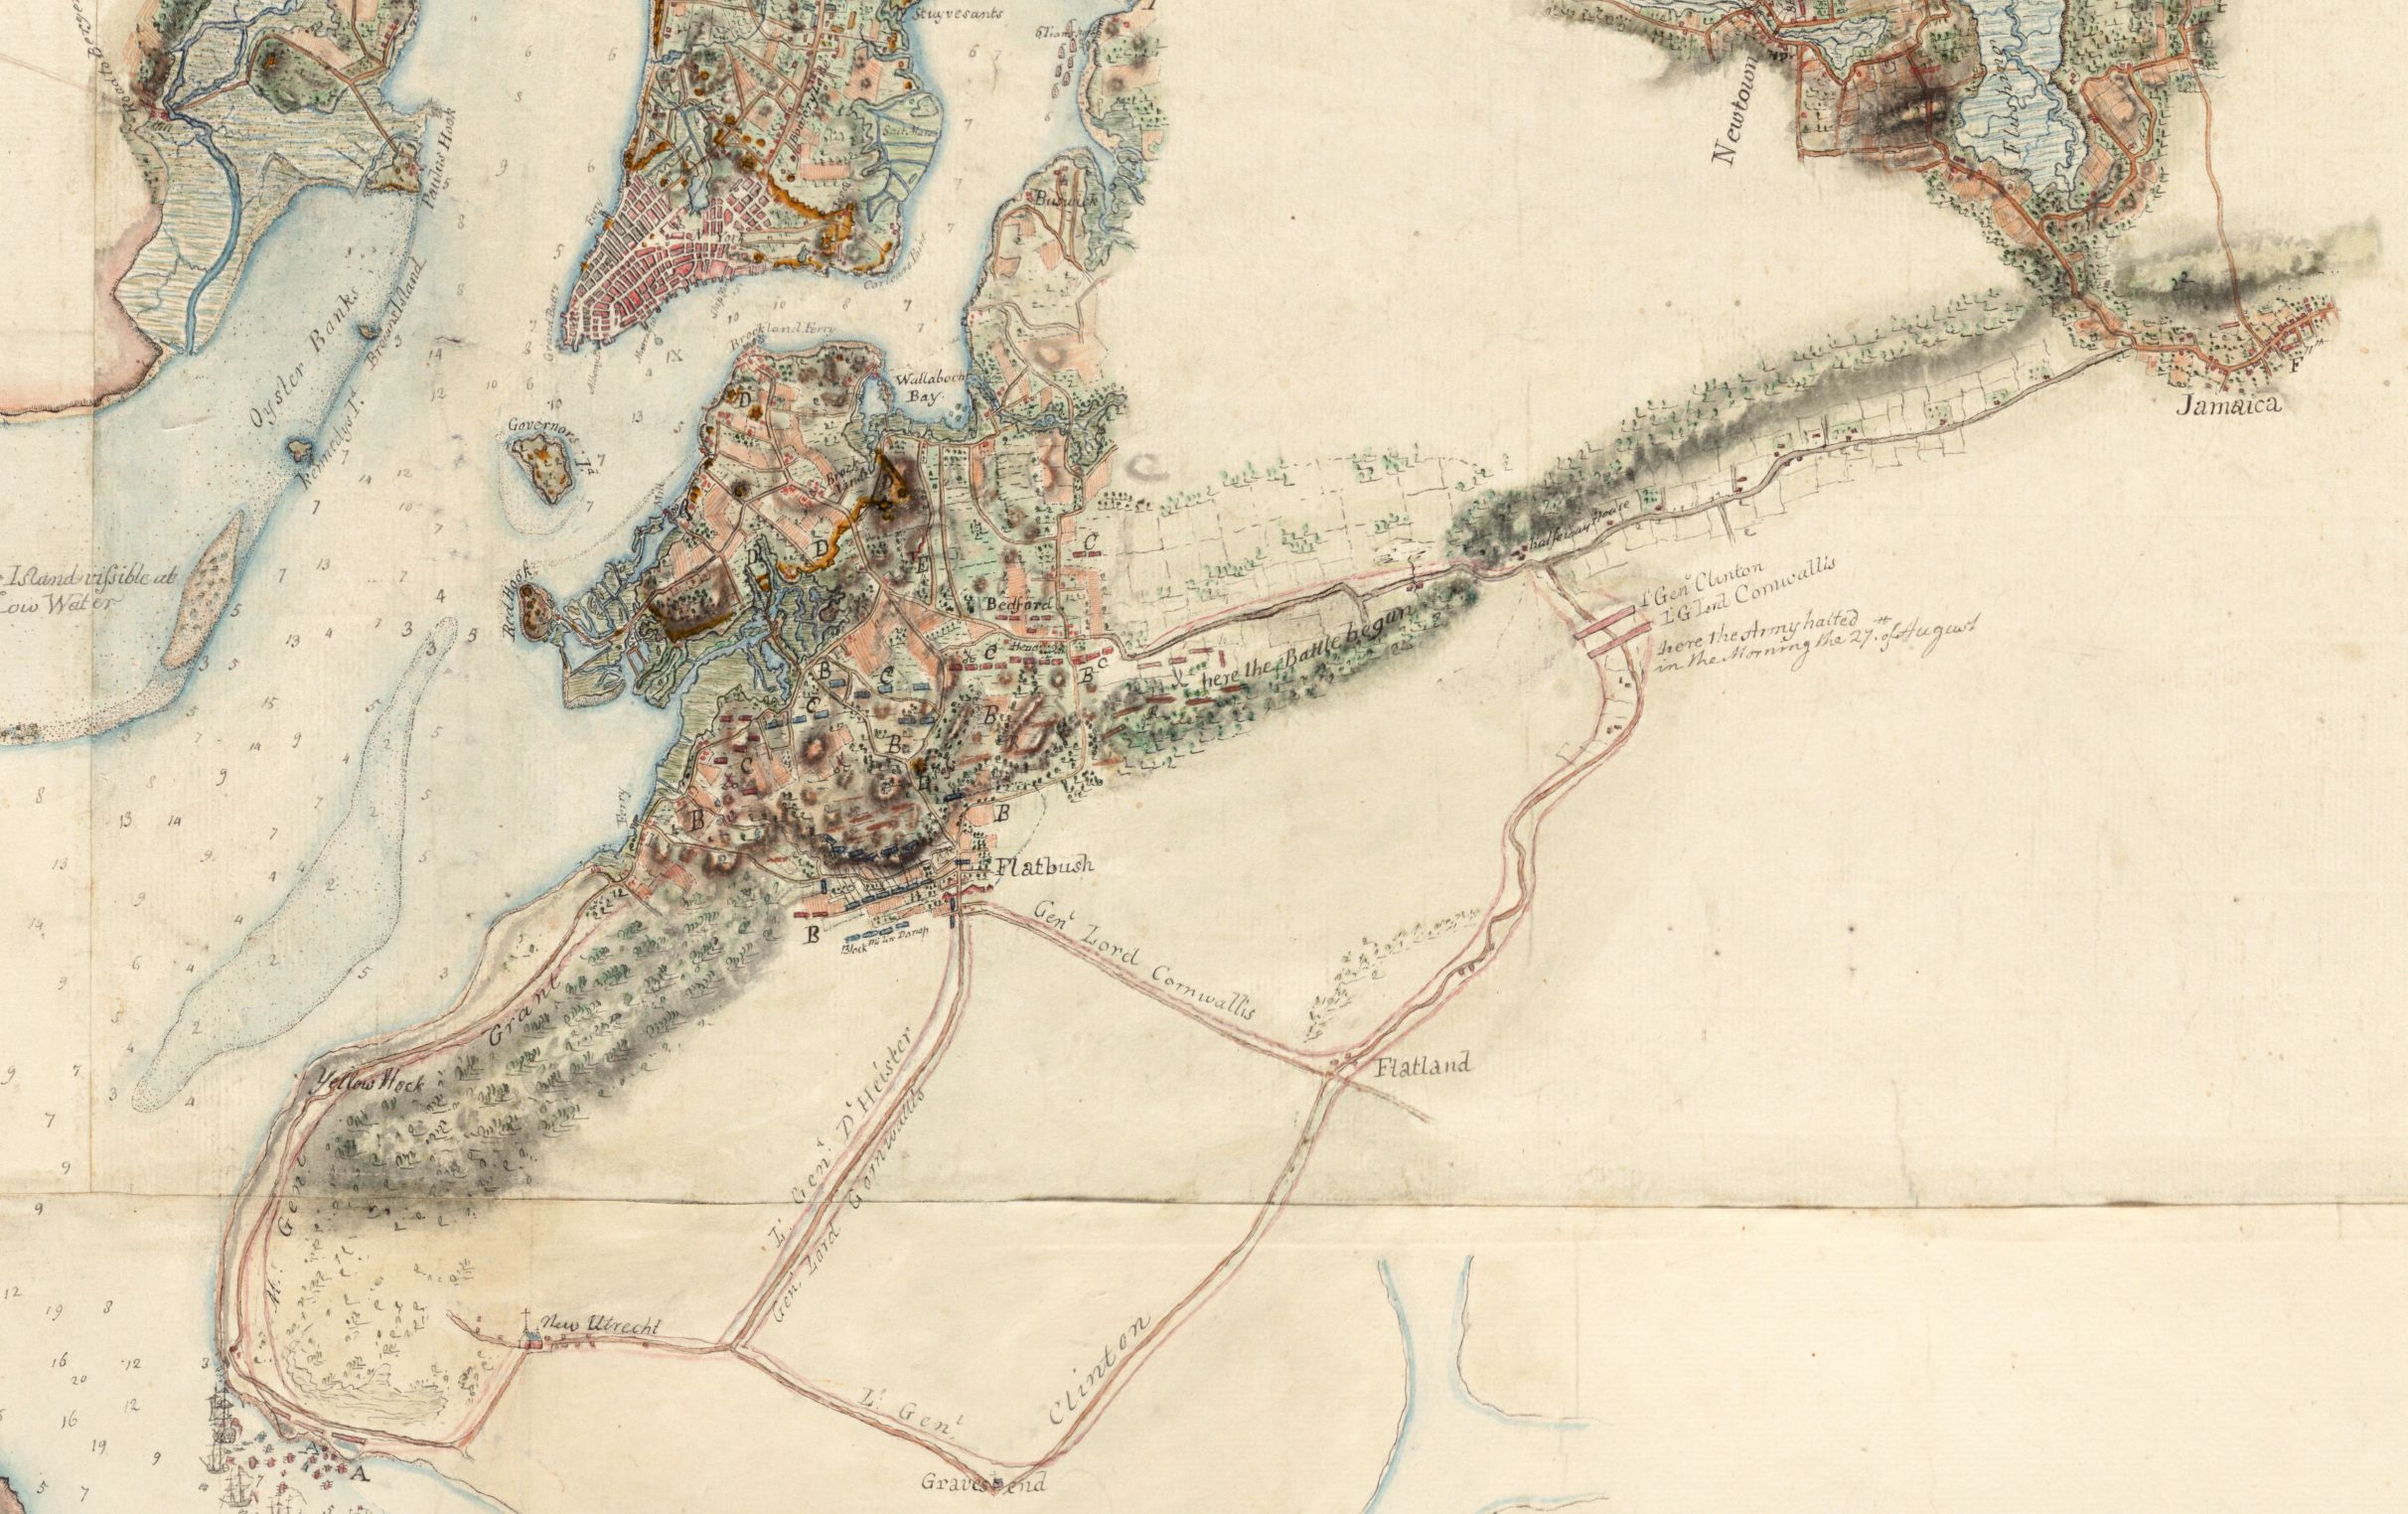 A section of a map of the area surrounding New York City, showing the city itself as well as a portion of Long Island south of it. On Long Island, troop movements and positions are labeled and displayed.